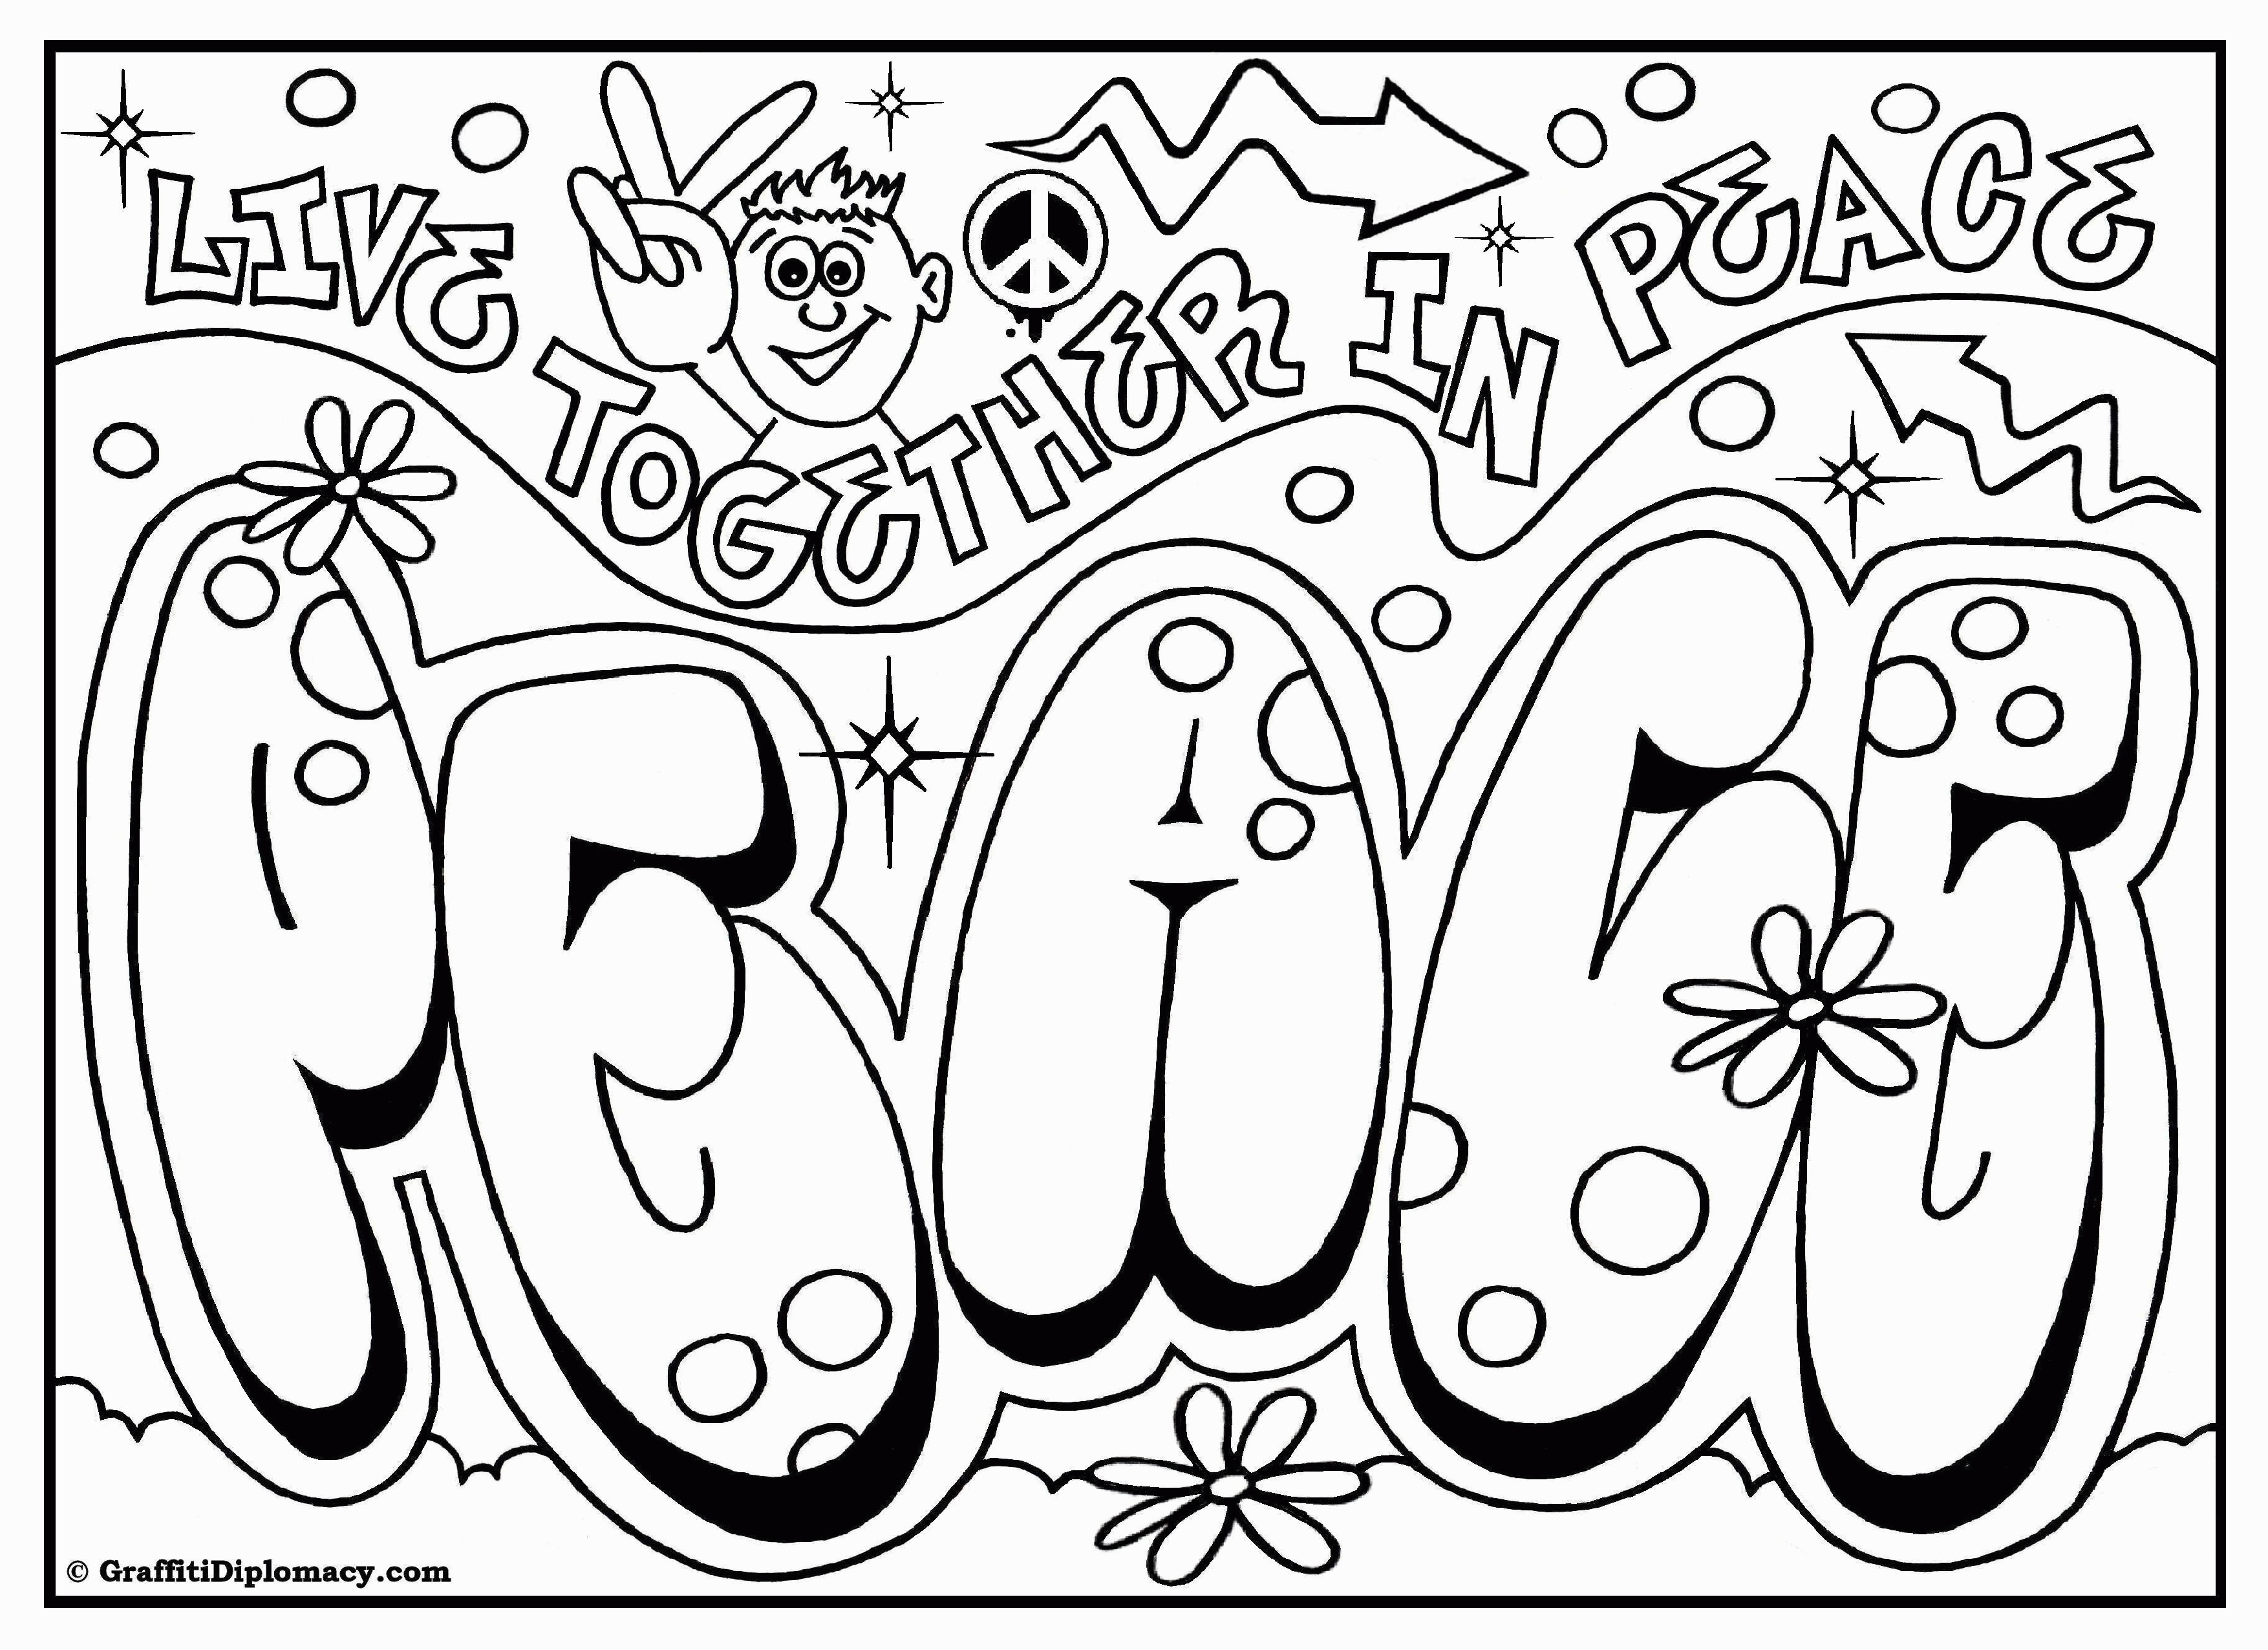 free-coloring-pages-for-teenagers-graffiti-download-free-coloring-pages-for-teenagers-graffiti